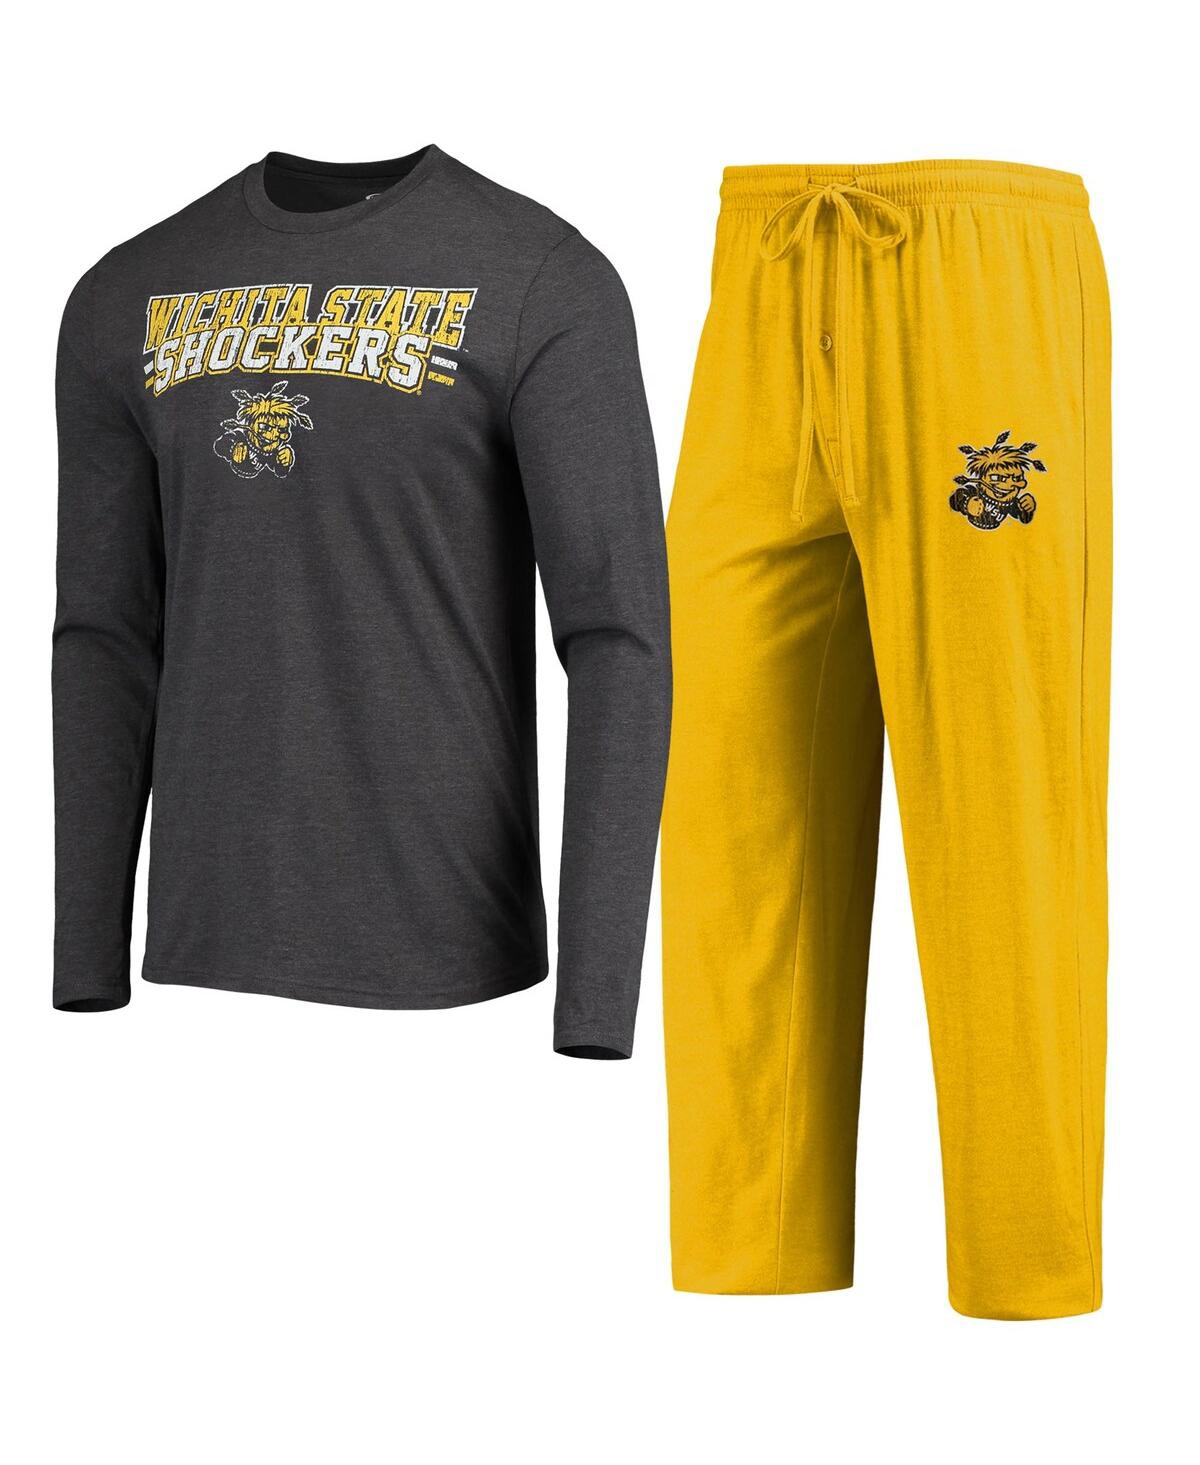 Shop Concepts Sport Men's  Yellow, Heathered Charcoal Wichita State Shockers Meter Long Sleeve T-shirt And In Yellow,heathered Charcoal